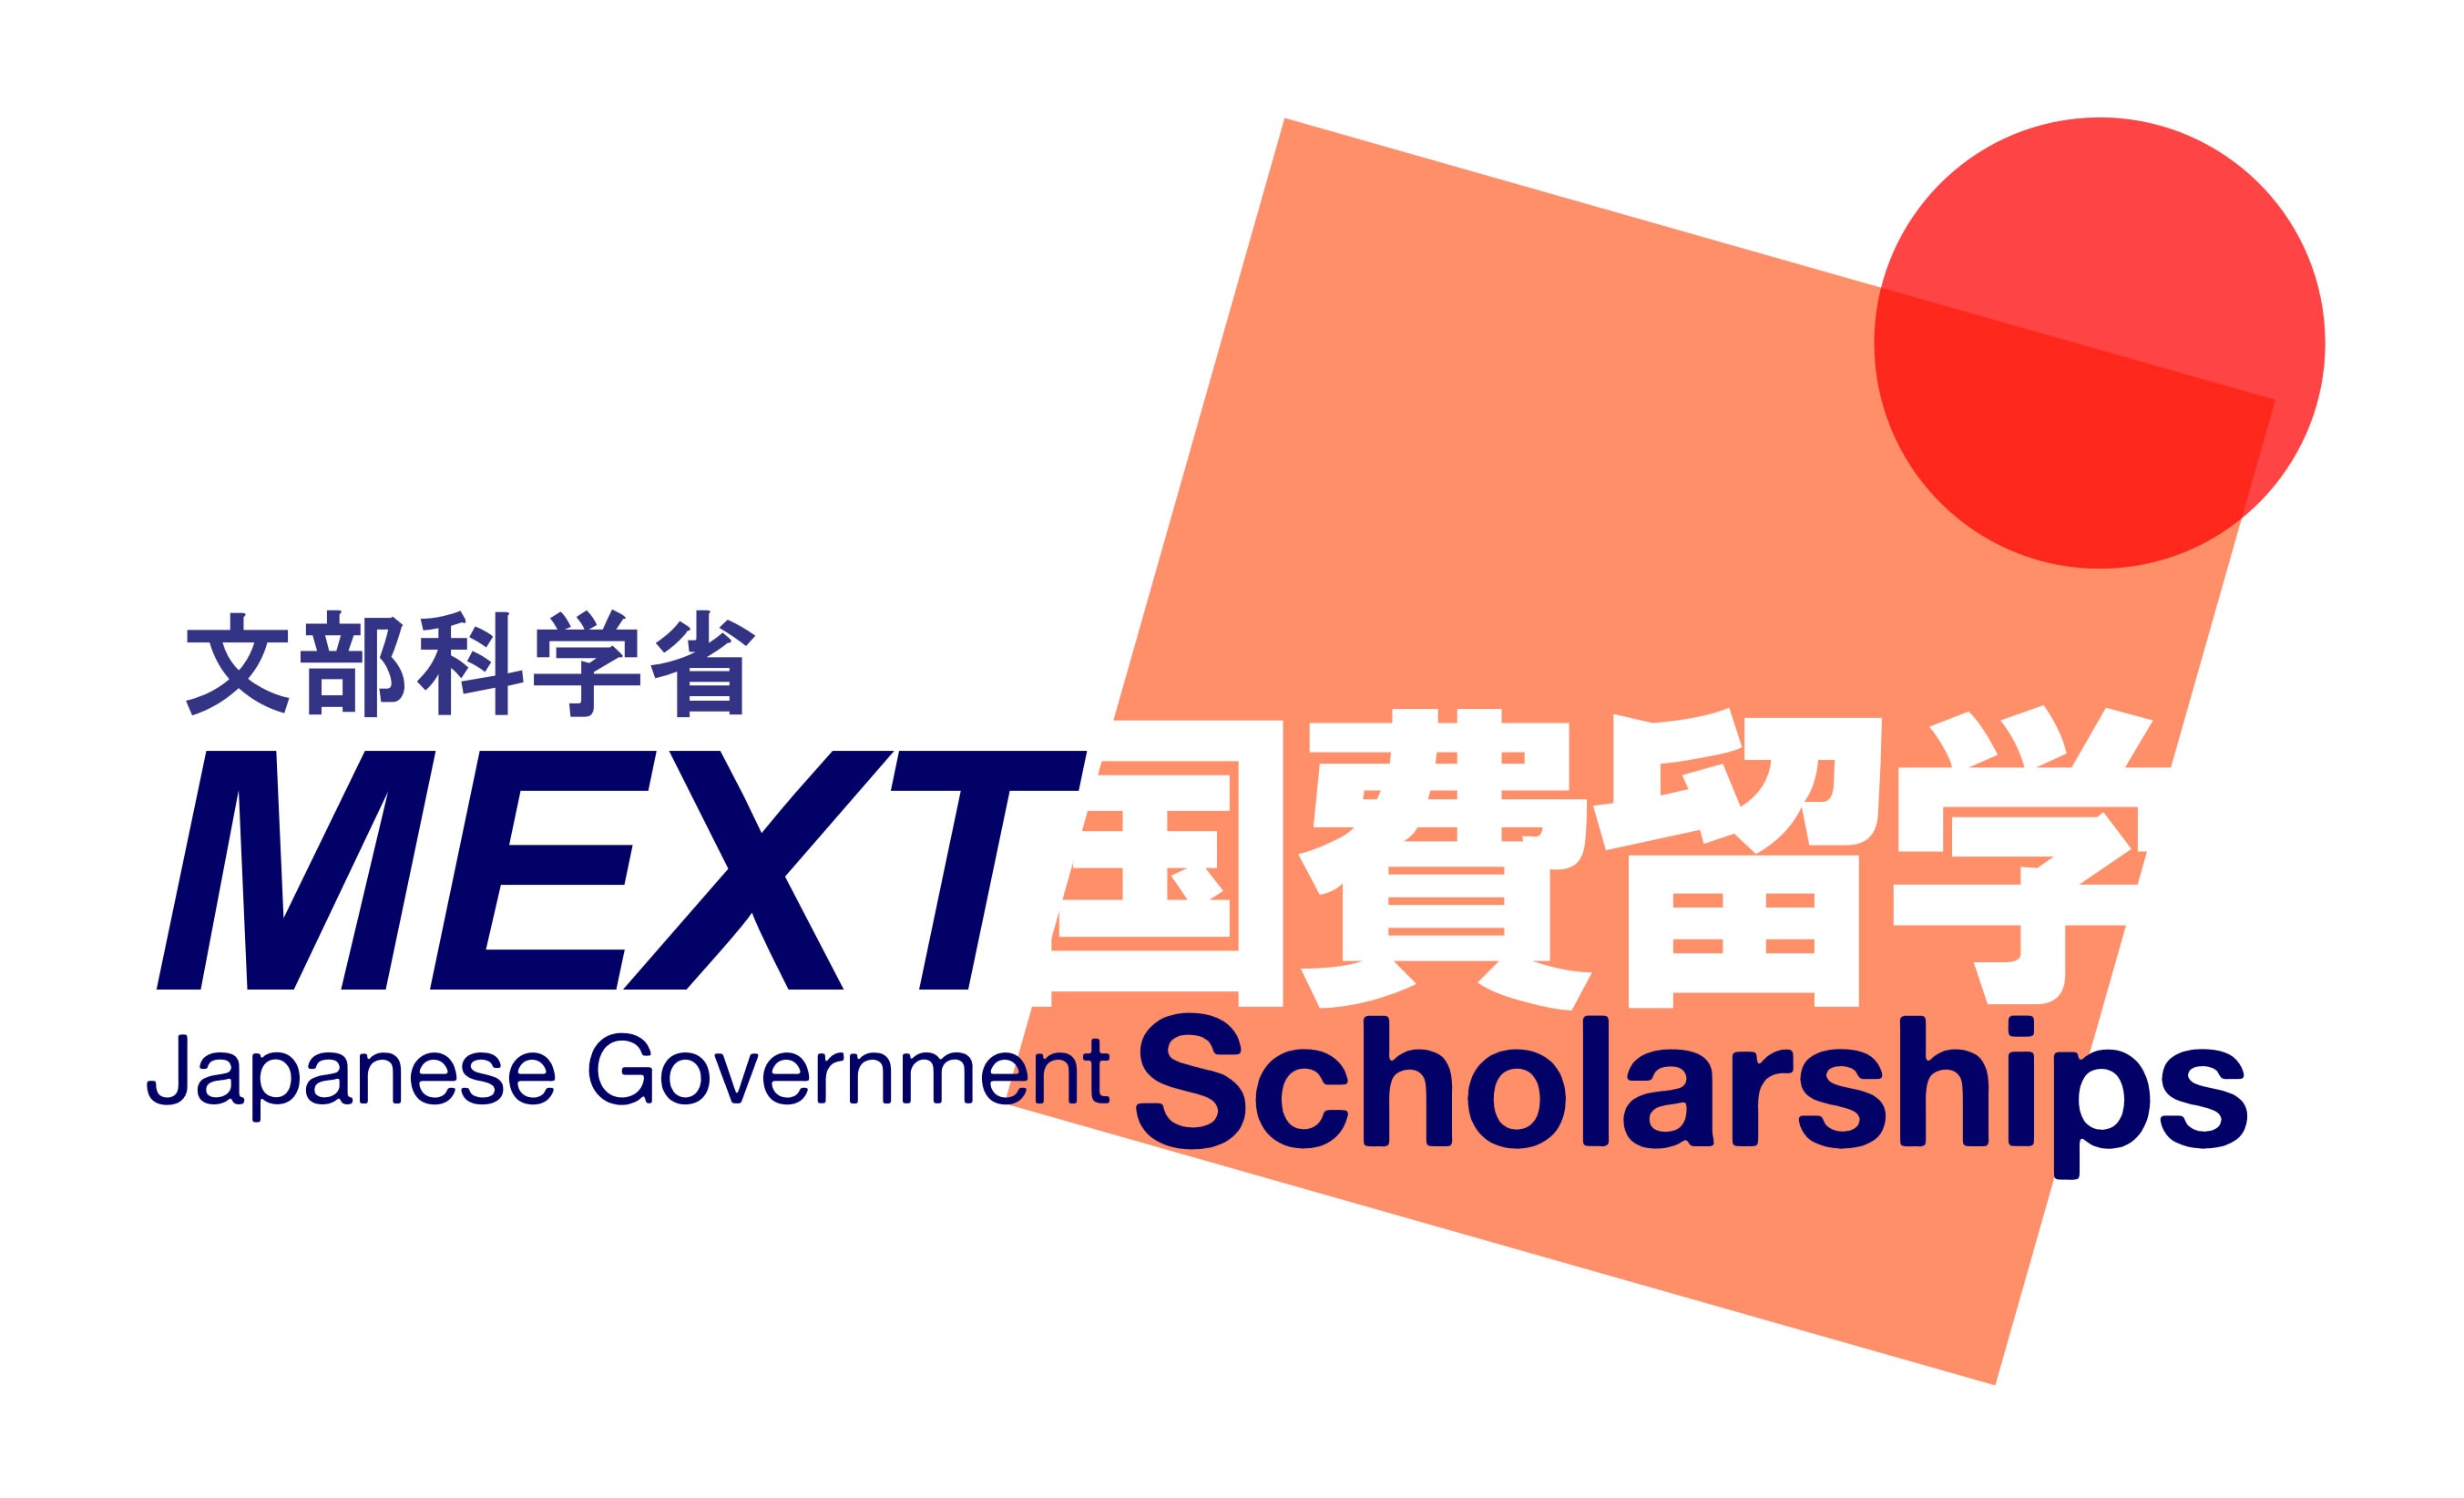 Japanese Government (MEXT) Scholarships.